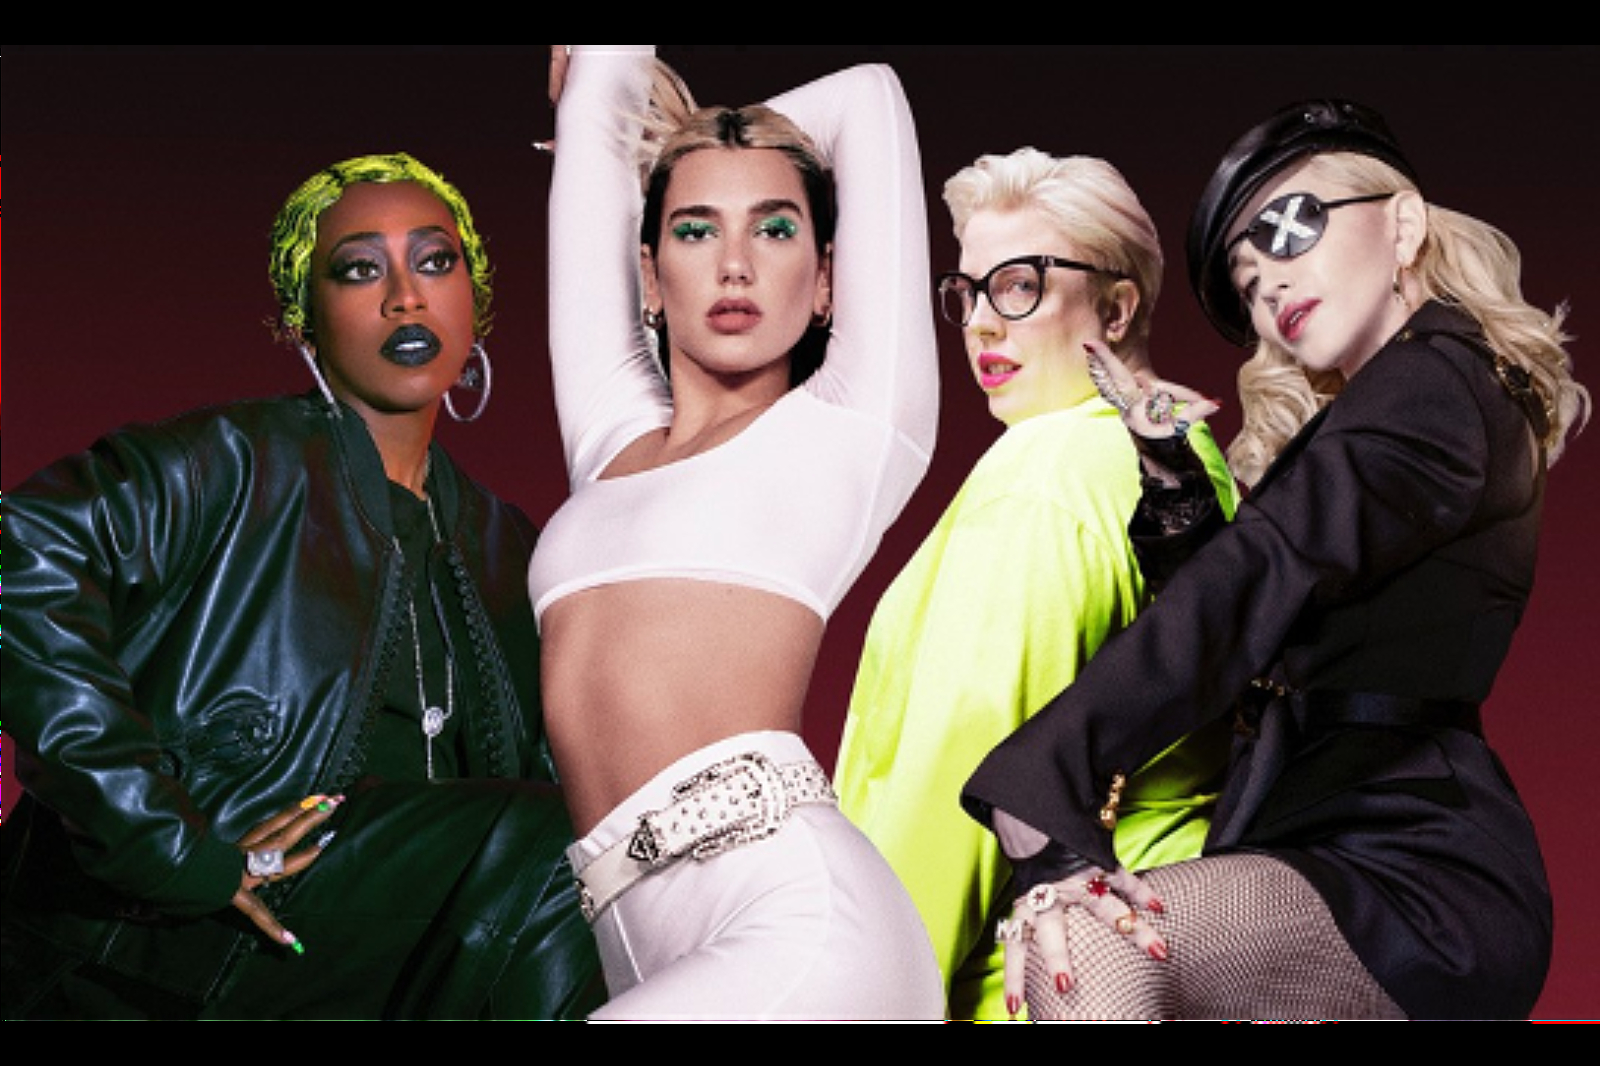 Dua Lipa teams up with Madonna, Missy Elliott and The Blessed Madonna for 'Levitating' remix